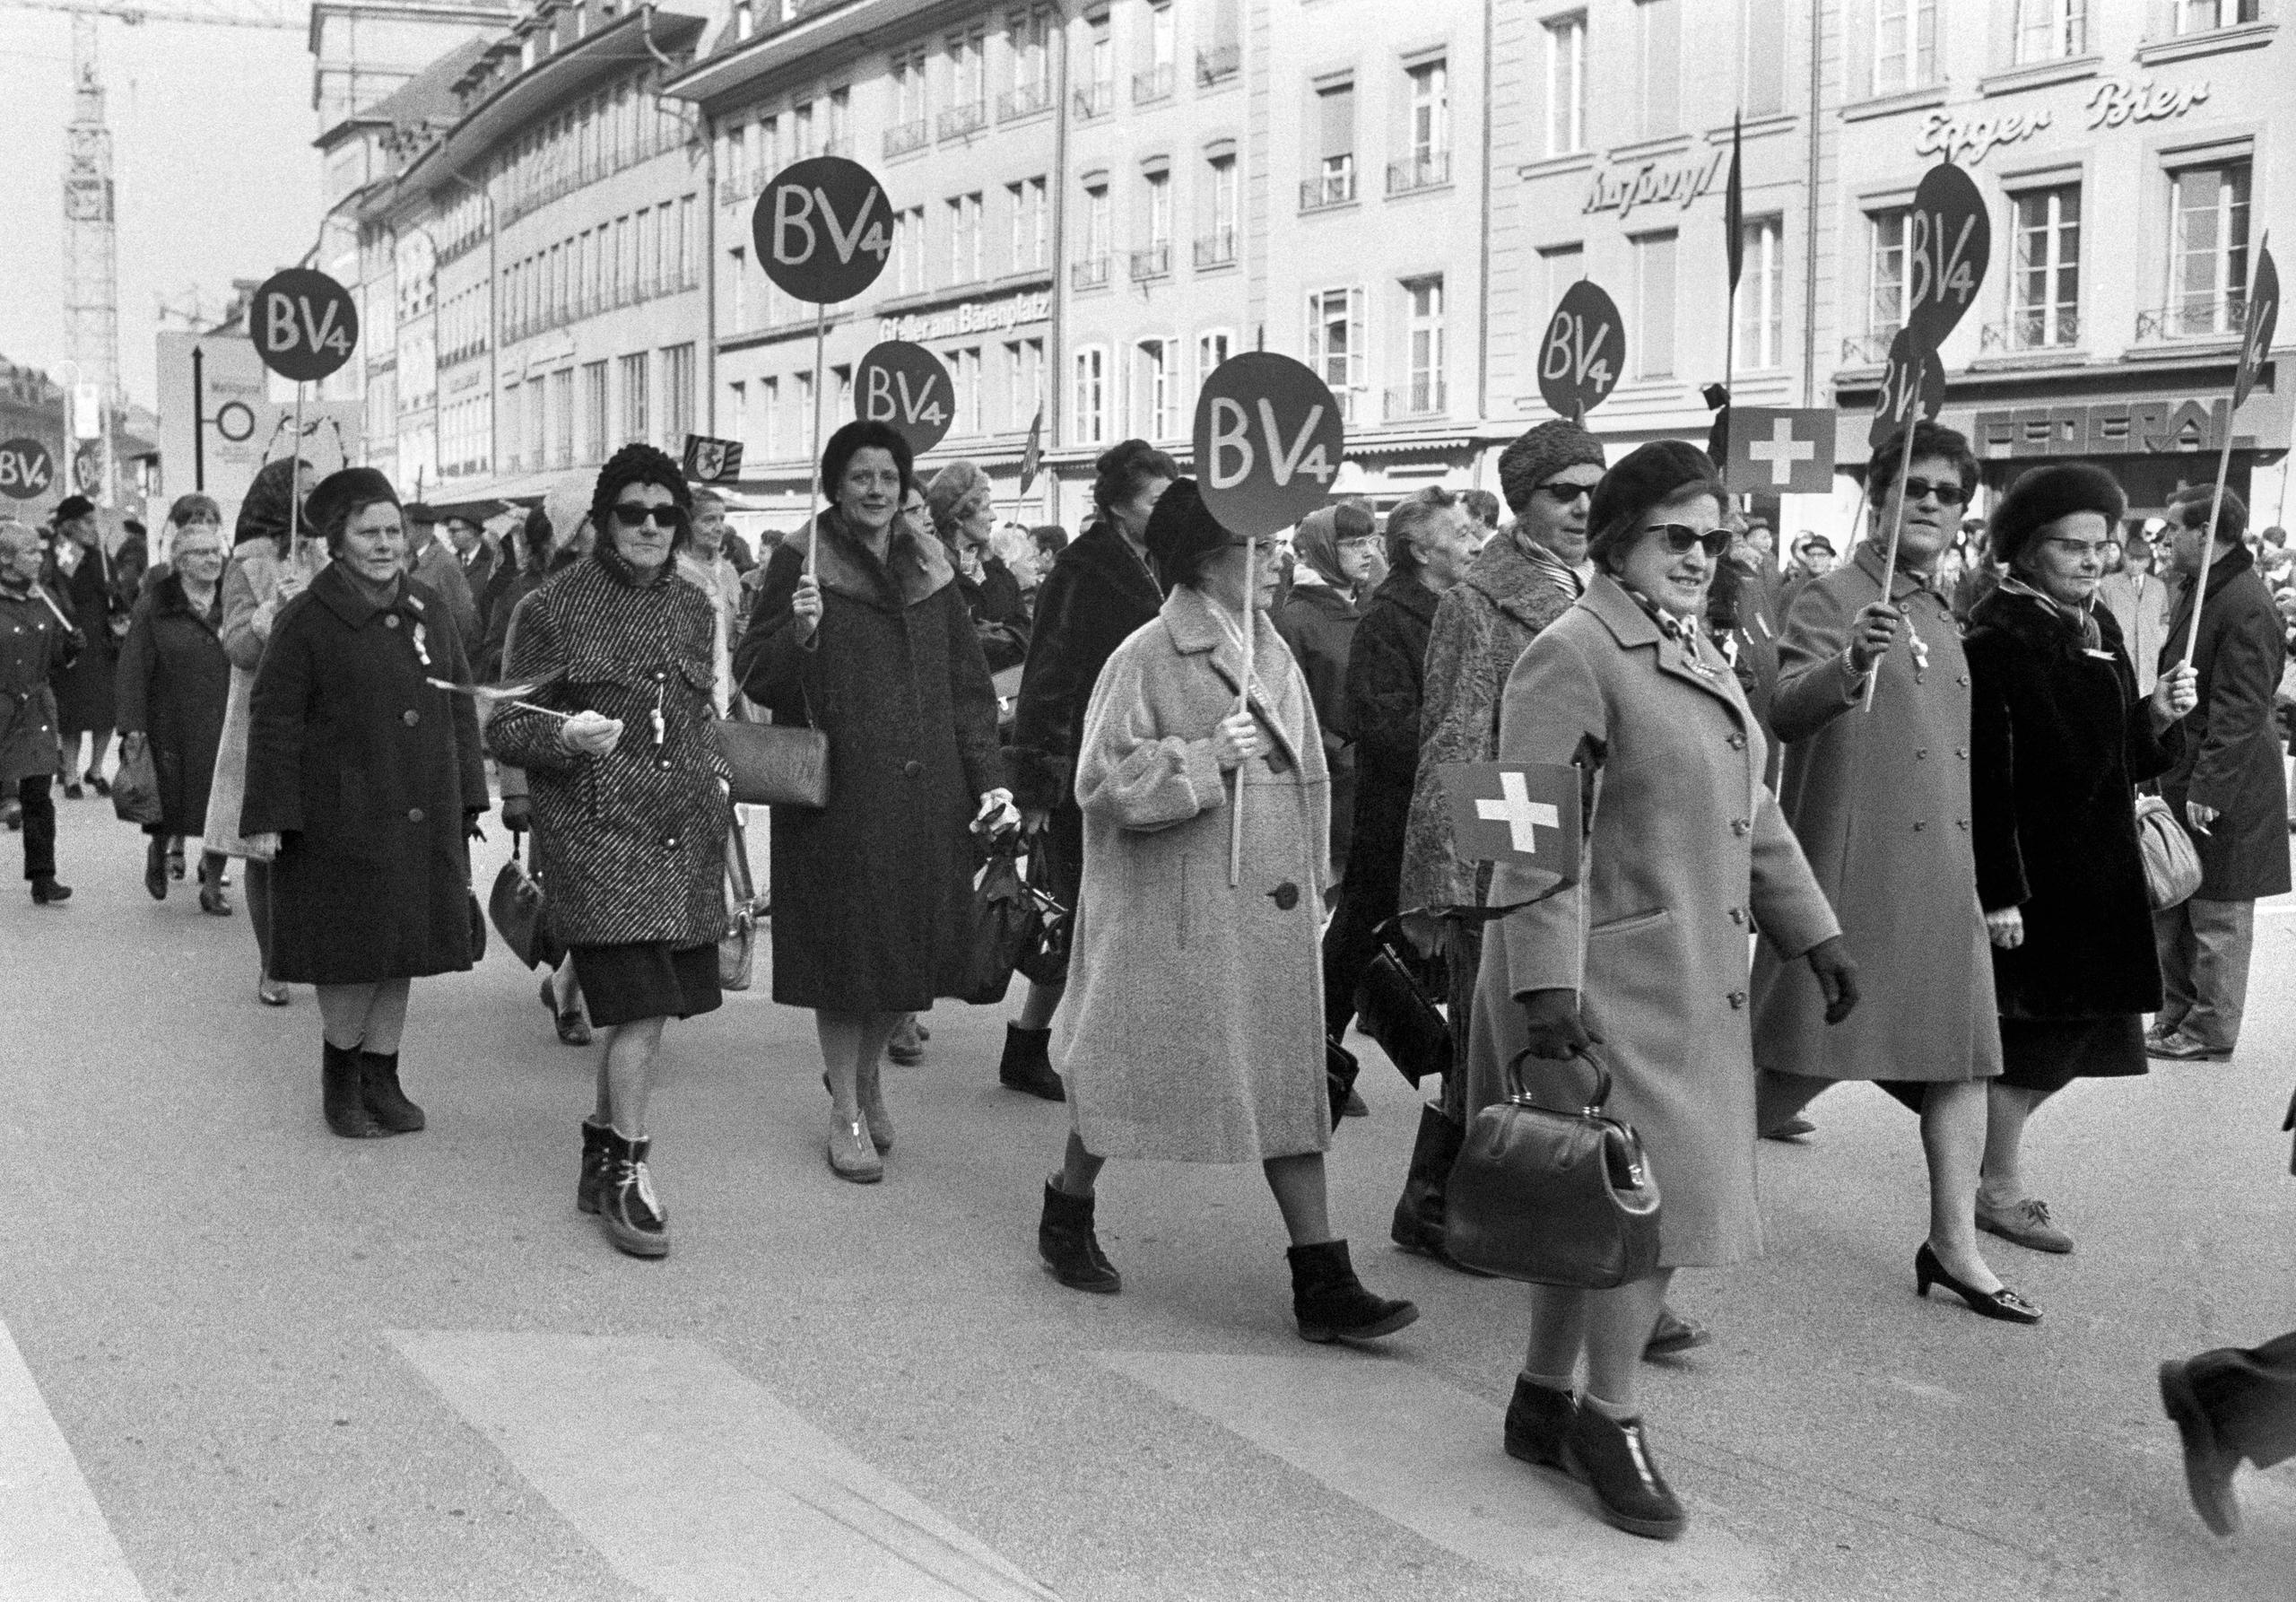 Women marching for the vote